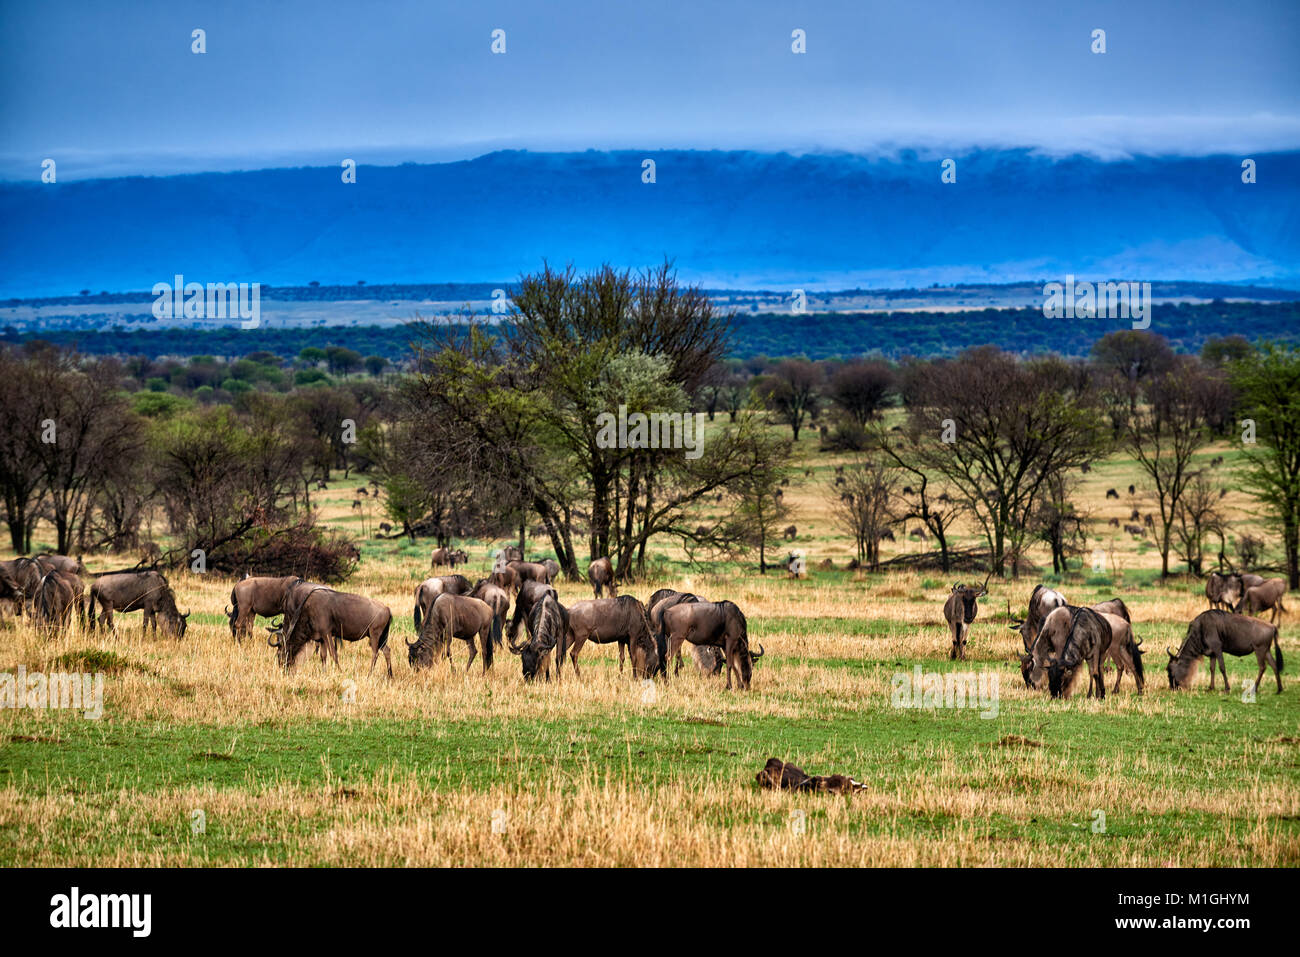 cloud formations at Great Rift Valley, landscape in Serengeti National Park with blue wilderbeests, UNESCO world heritage site, Tanzania, Africa Stock Photo